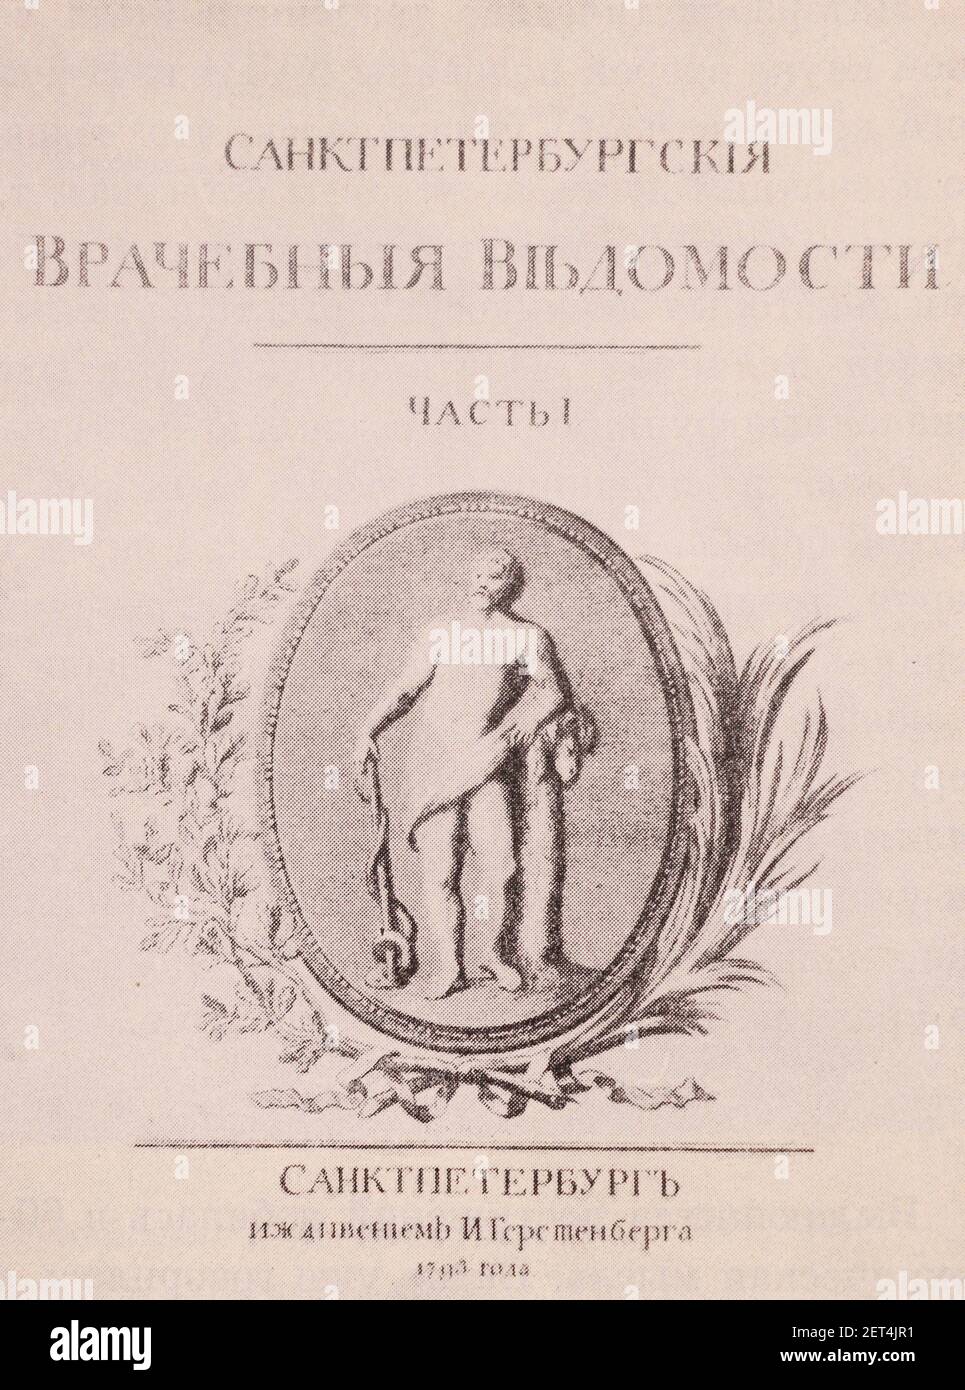 The title page of 'St. Petersburg Medical Bulletin' published in 1789. Stock Photo